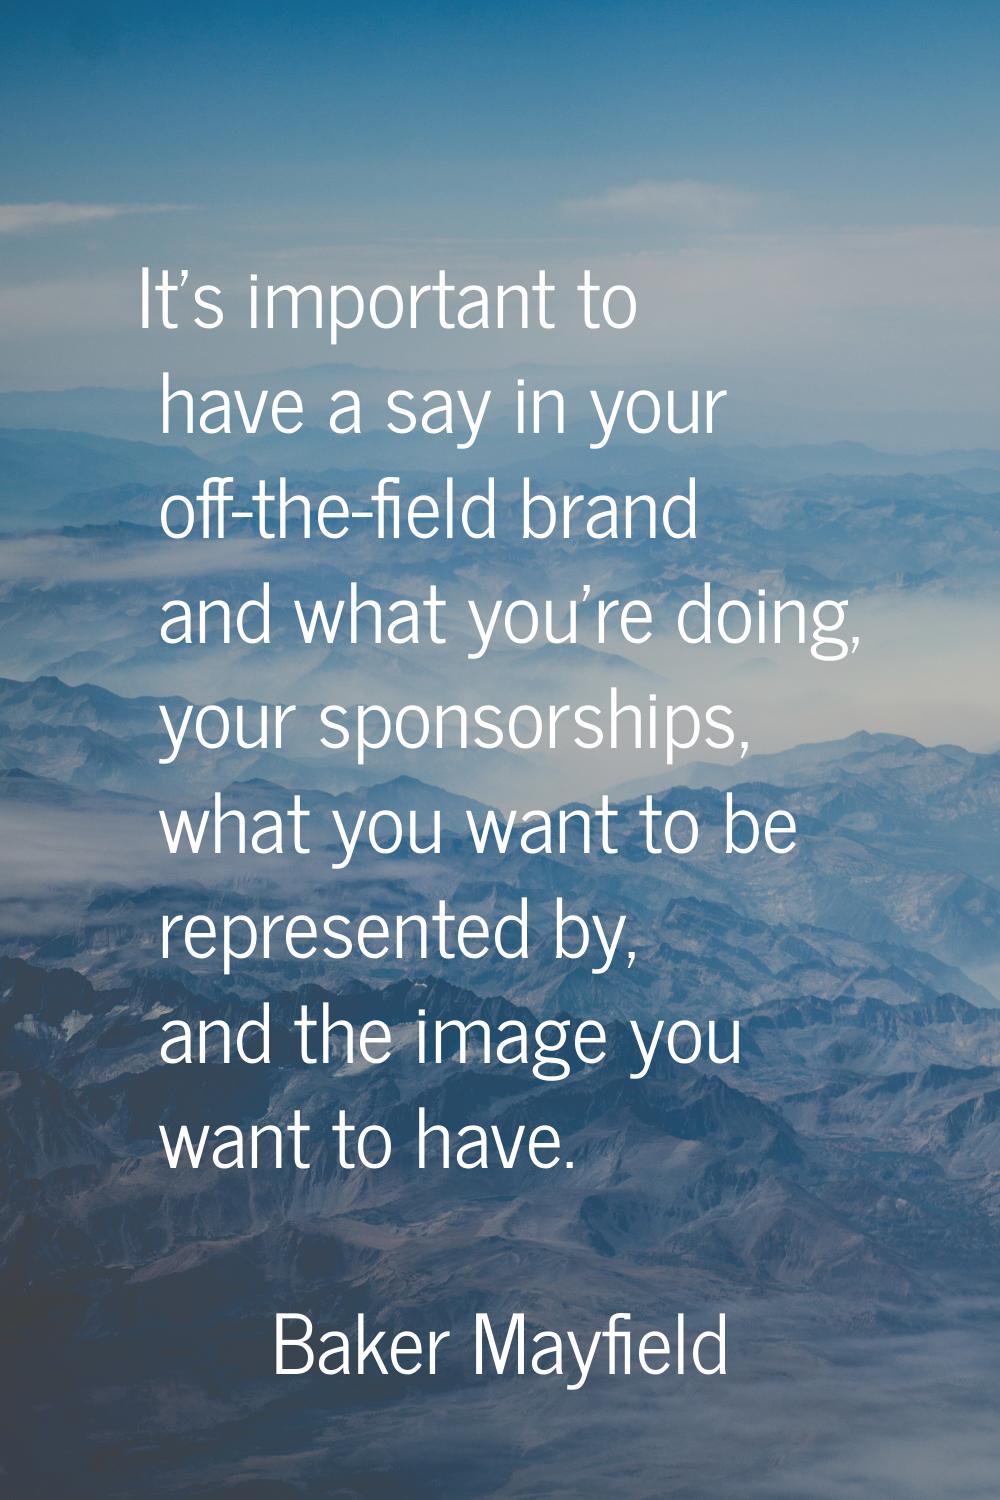 It's important to have a say in your off-the-field brand and what you're doing, your sponsorships, 